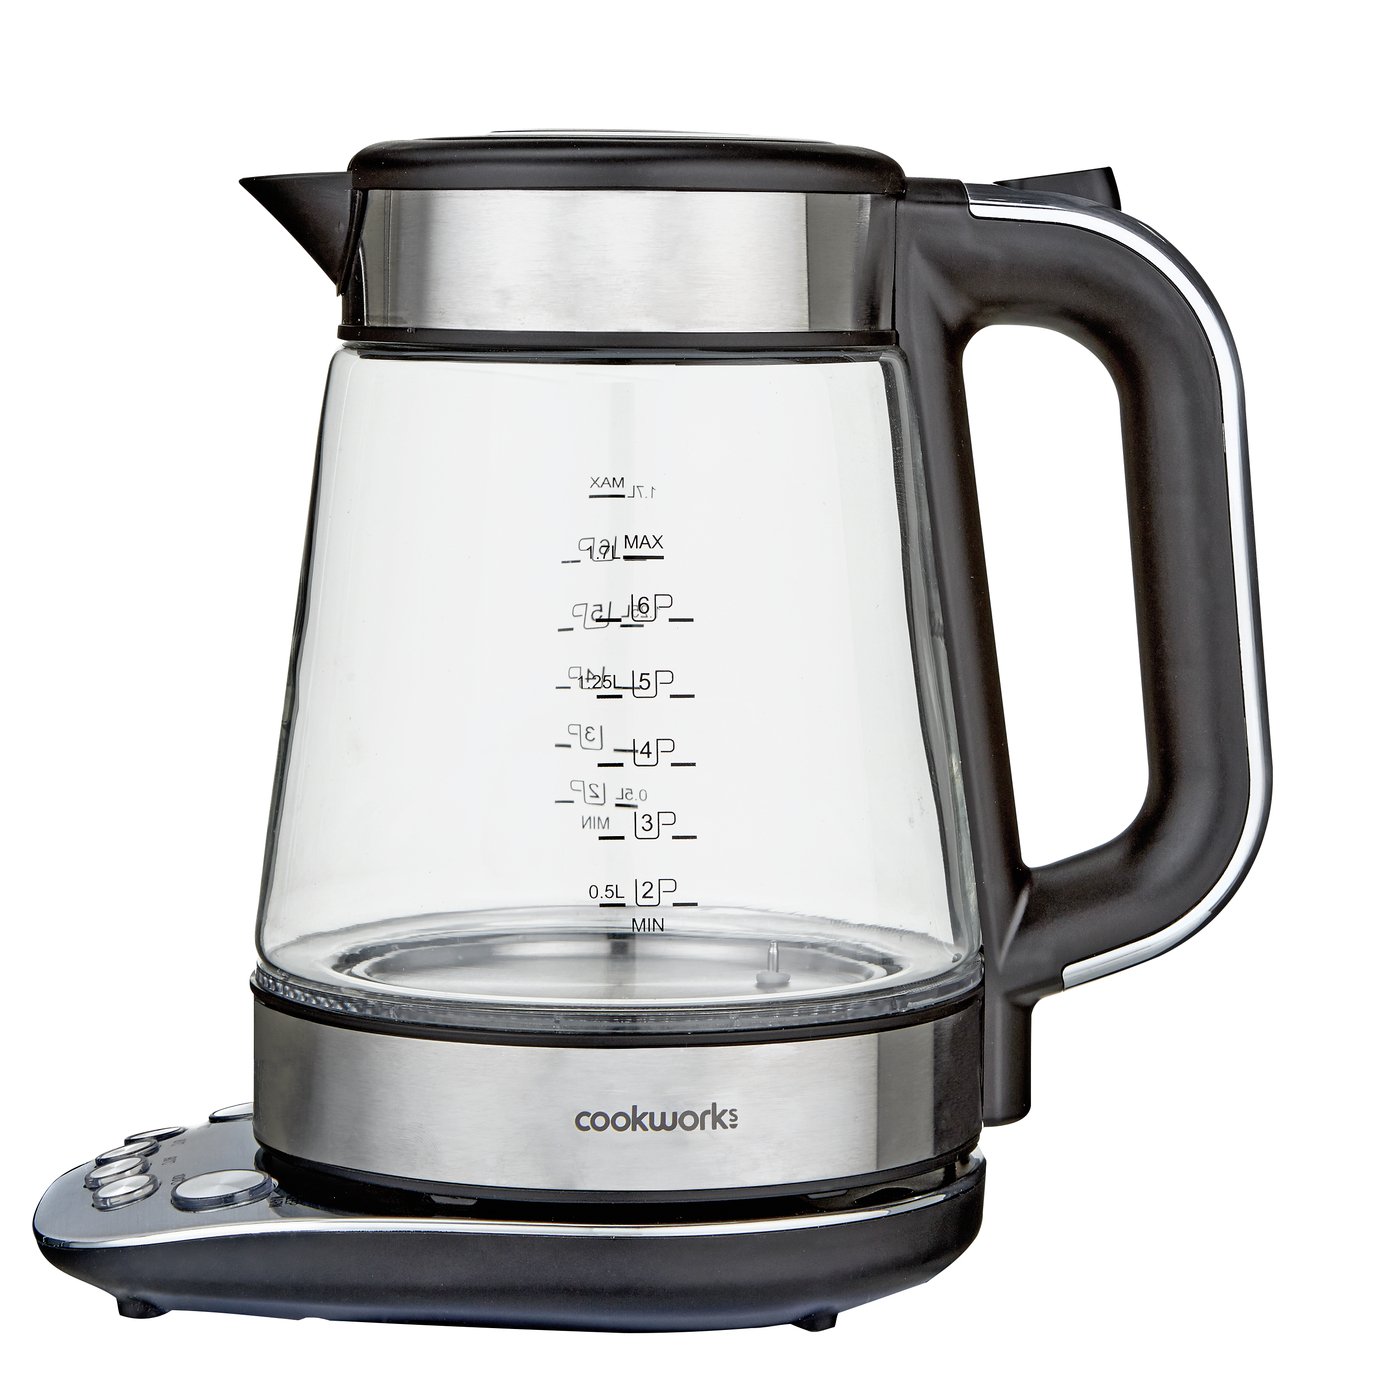 variable temperature kettle reviews